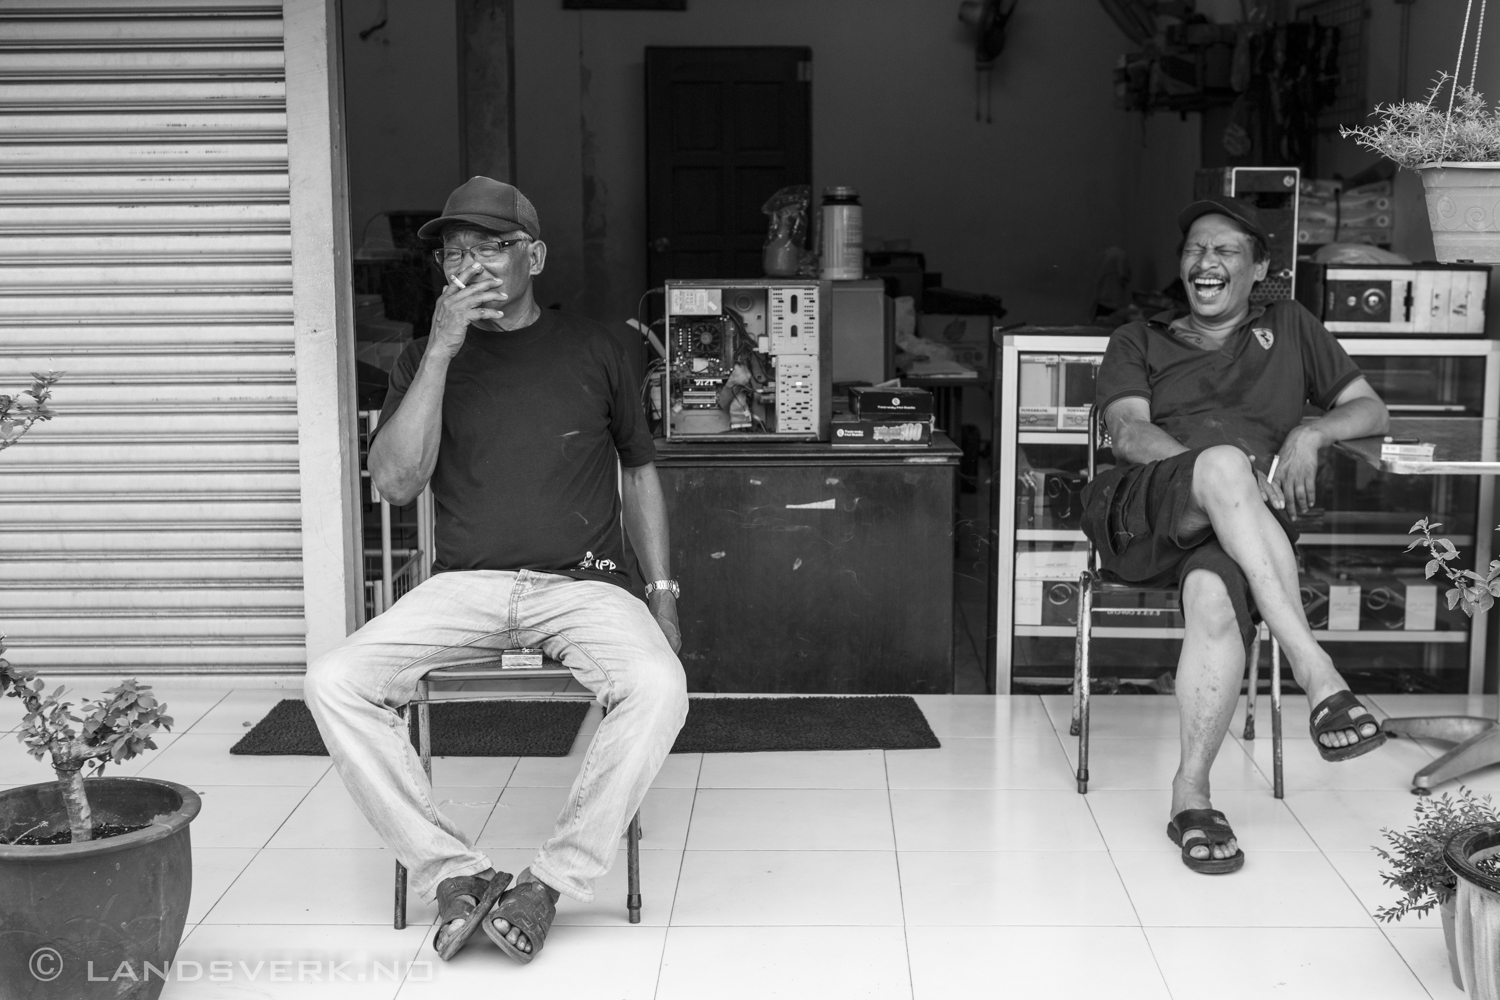 I was asking for the specs of the computer  behind them. Apparently not that great. Kampung Baru, Kuala Lumpur, Malaysia.

(Canon EOS 5D Mark III / Canon EF 24-70mm f/2.8 L USM)